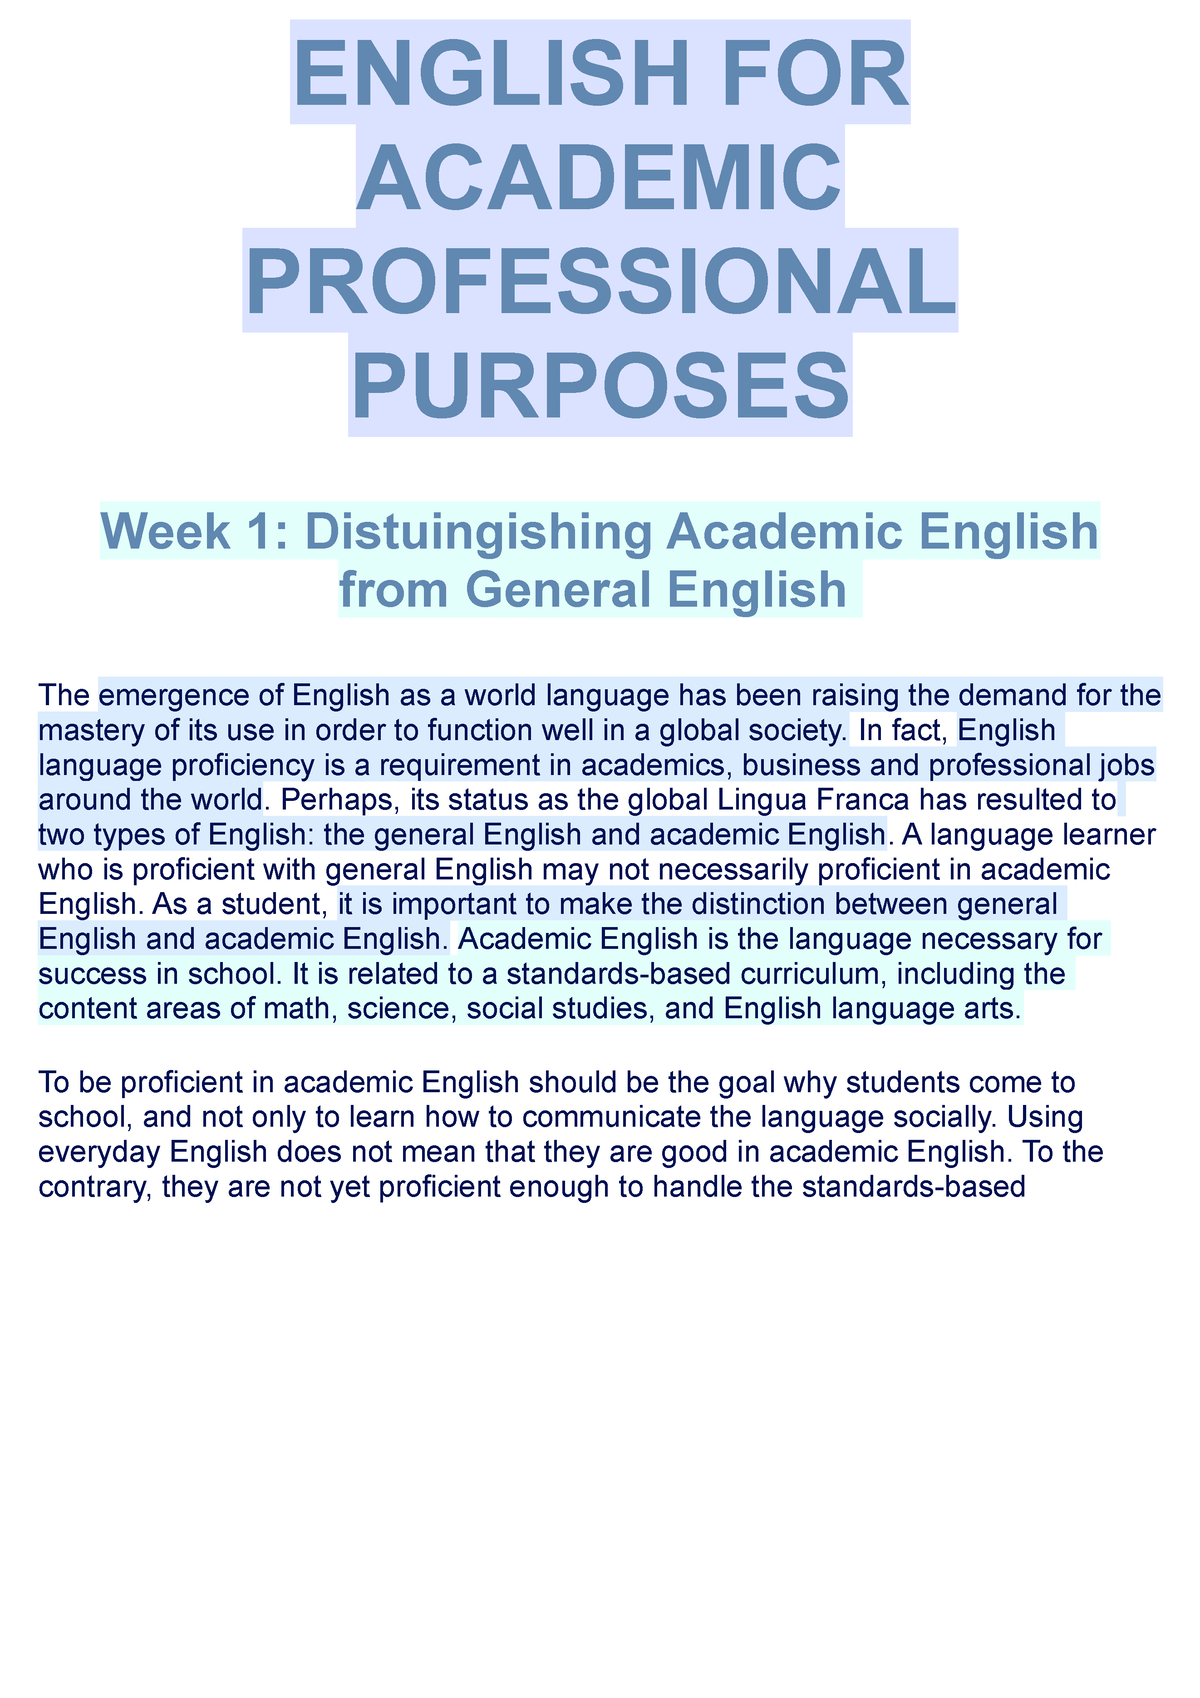 essay about english for academic and professional purposes